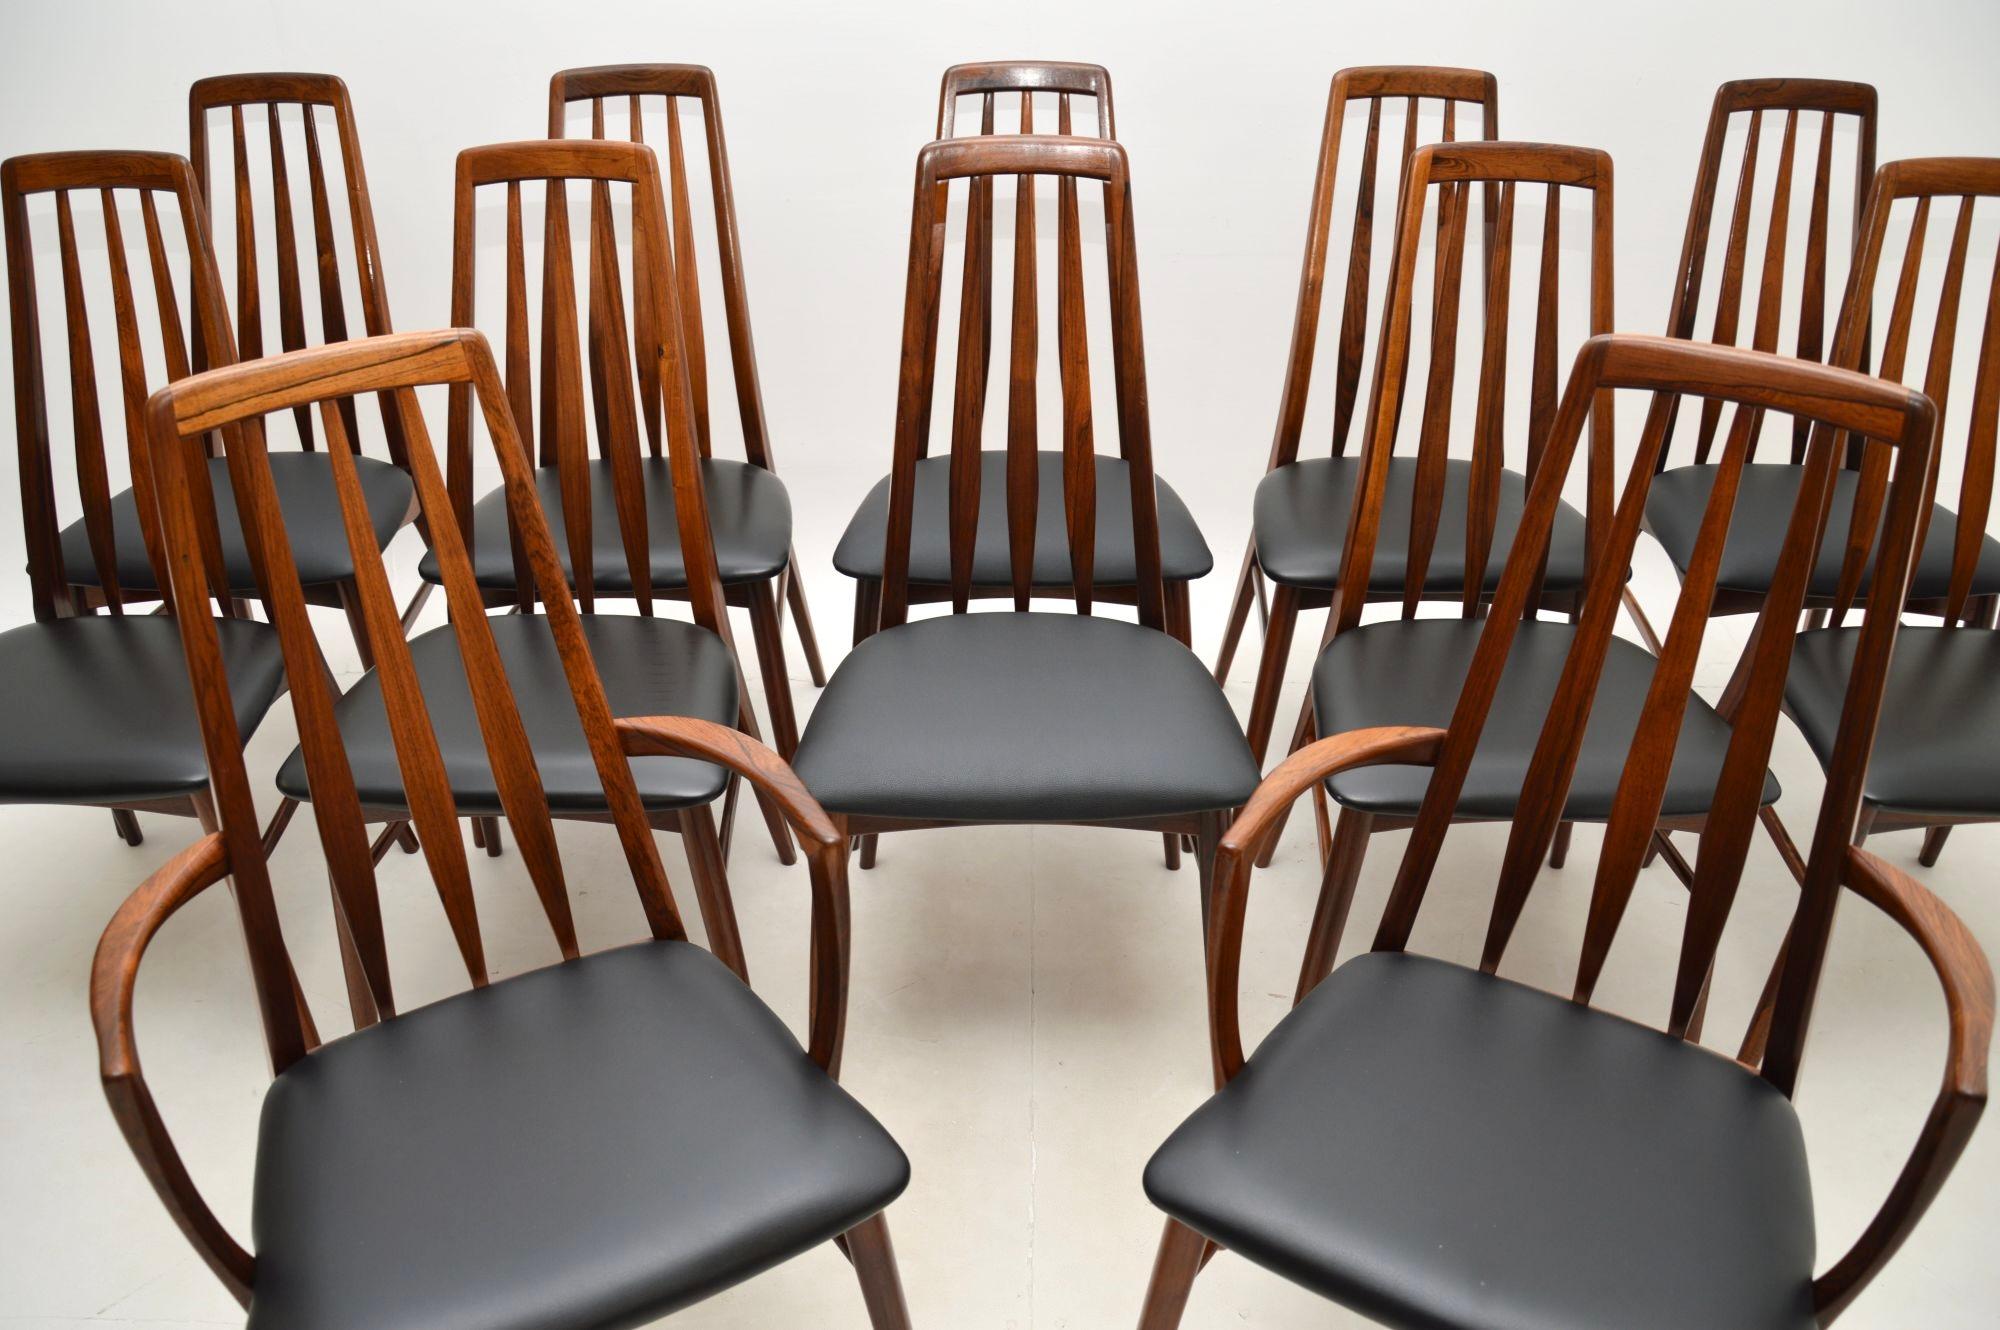 A stunning set of twelve Danish vintage dining chairs by Niels Koefoed. They date from the 1960’s and were made by Koefoeds Hornslet.

We have had these fully restored and they are in absolutely immaculate condition. The frames have been stripped